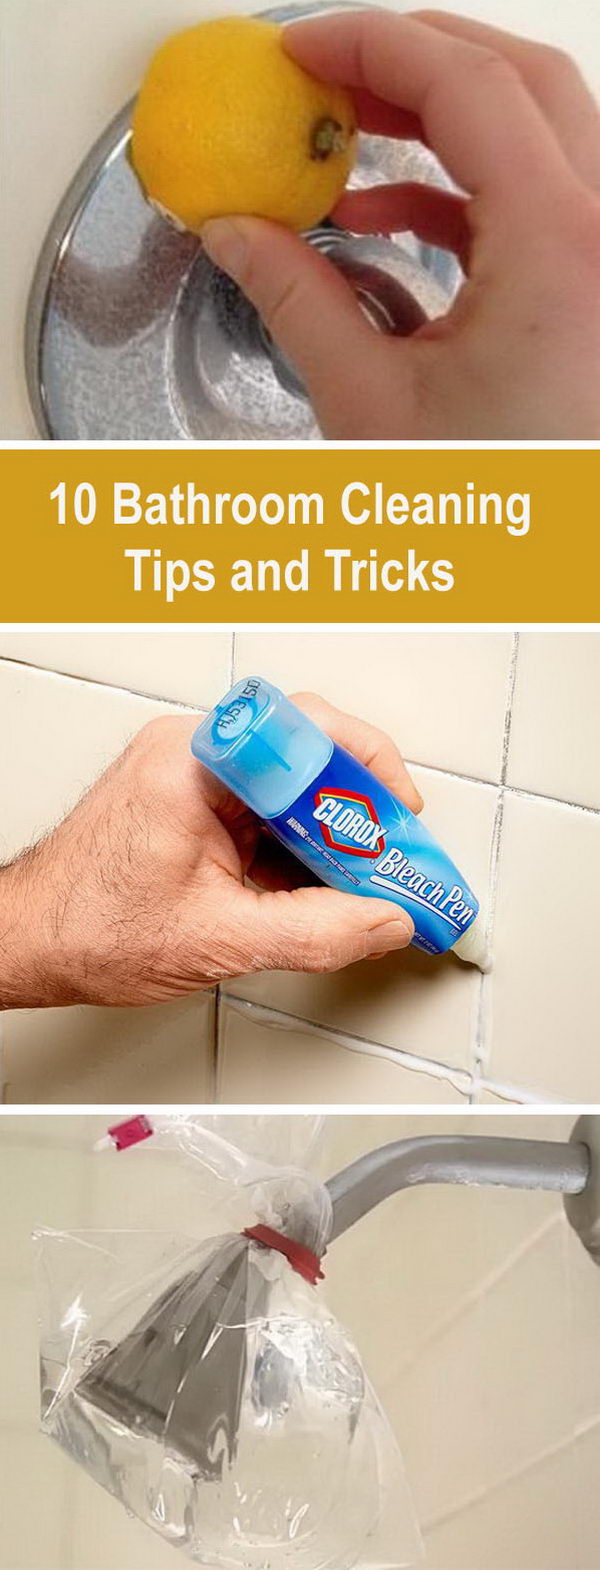 10 Bathroom Cleaning Tips and Tricks. 